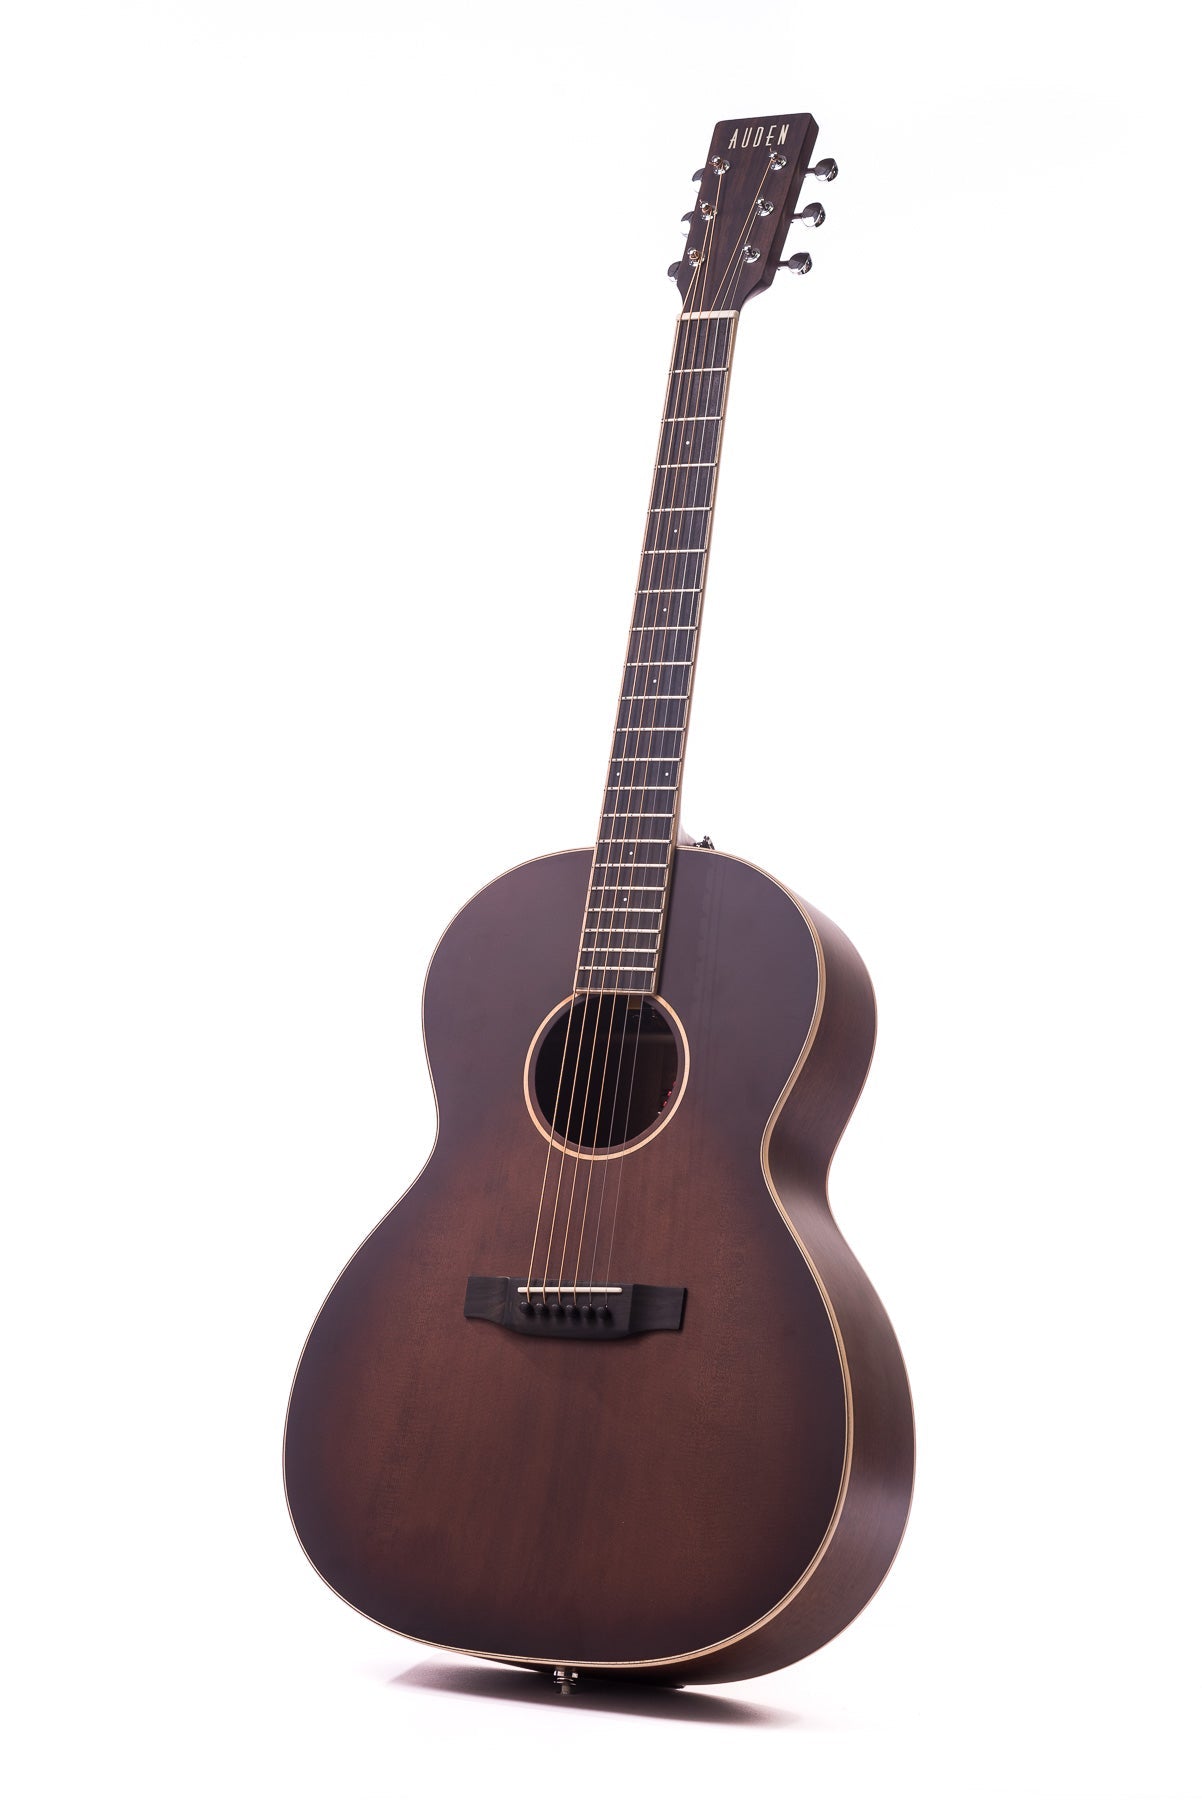 Auden Chester Tobacco Electro Acoustic Guitar-Richards Guitars Of Stratford Upon Avon